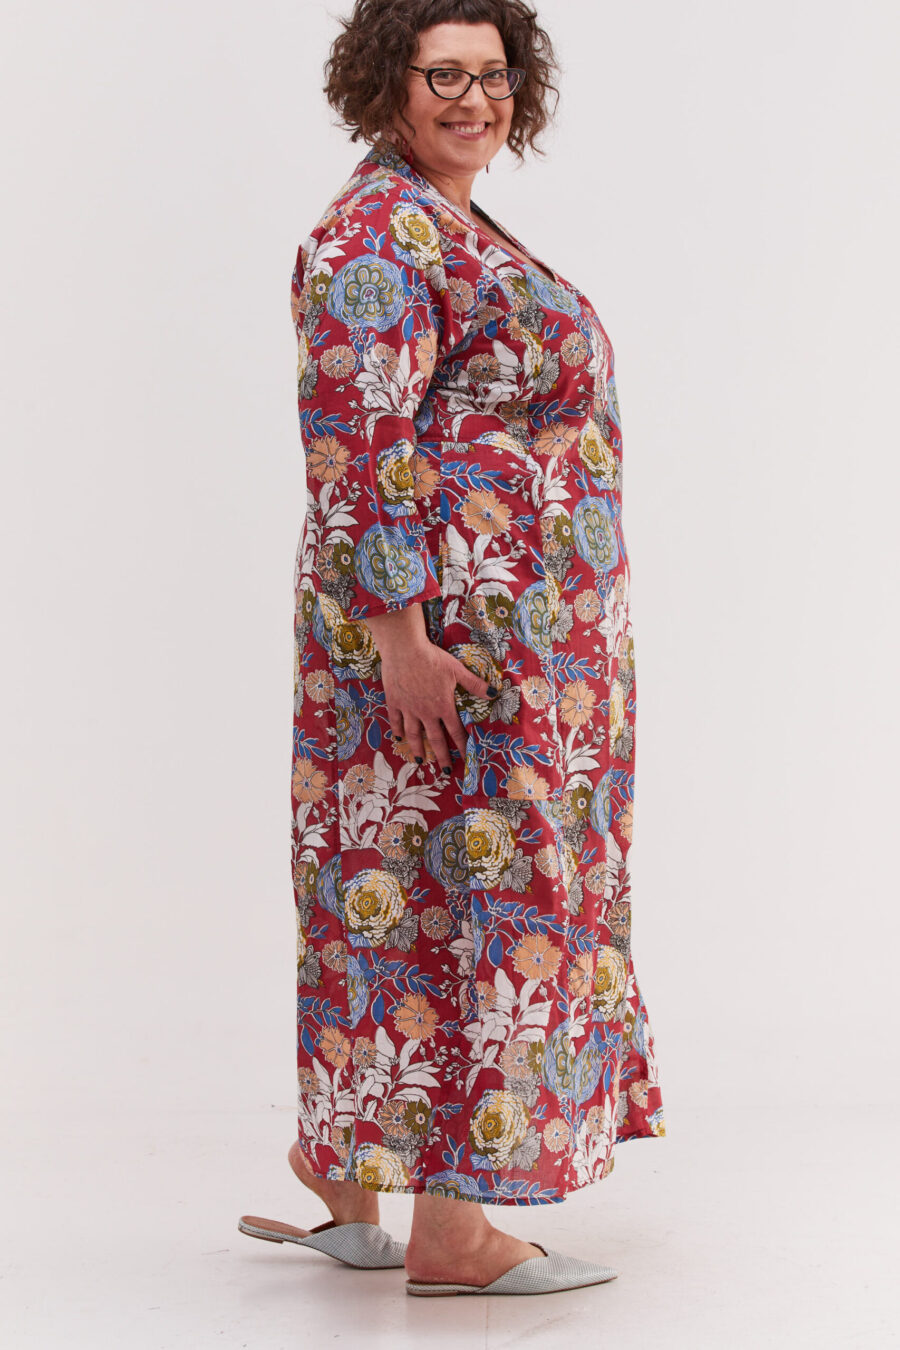 Jalabiya dress | Uniquely designed dress - Red blossom, colorful floral print on a red dress by comfort zone boutique